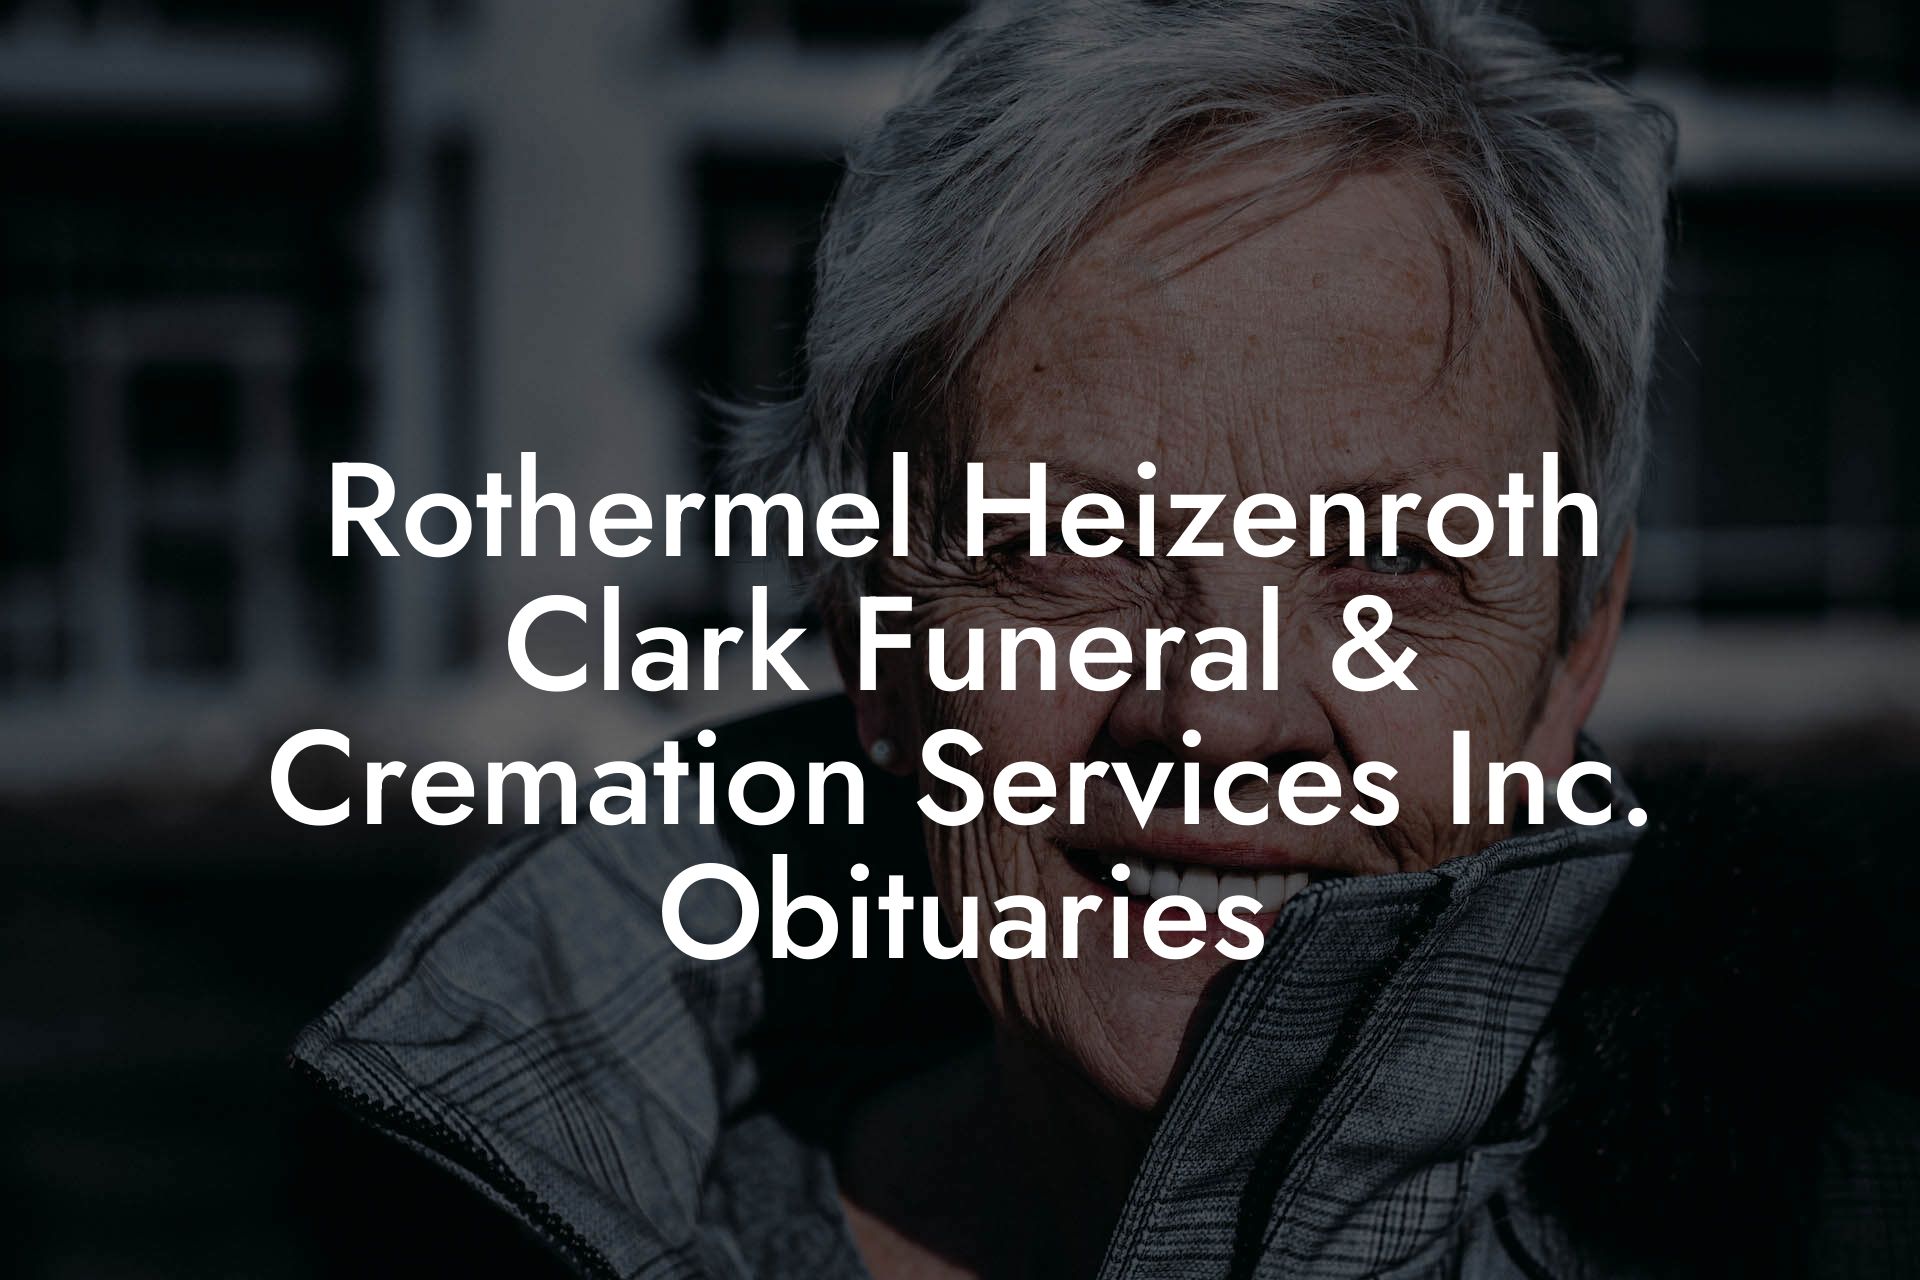 Rothermel Heizenroth Clark Funeral & Cremation Services Inc. Obituaries